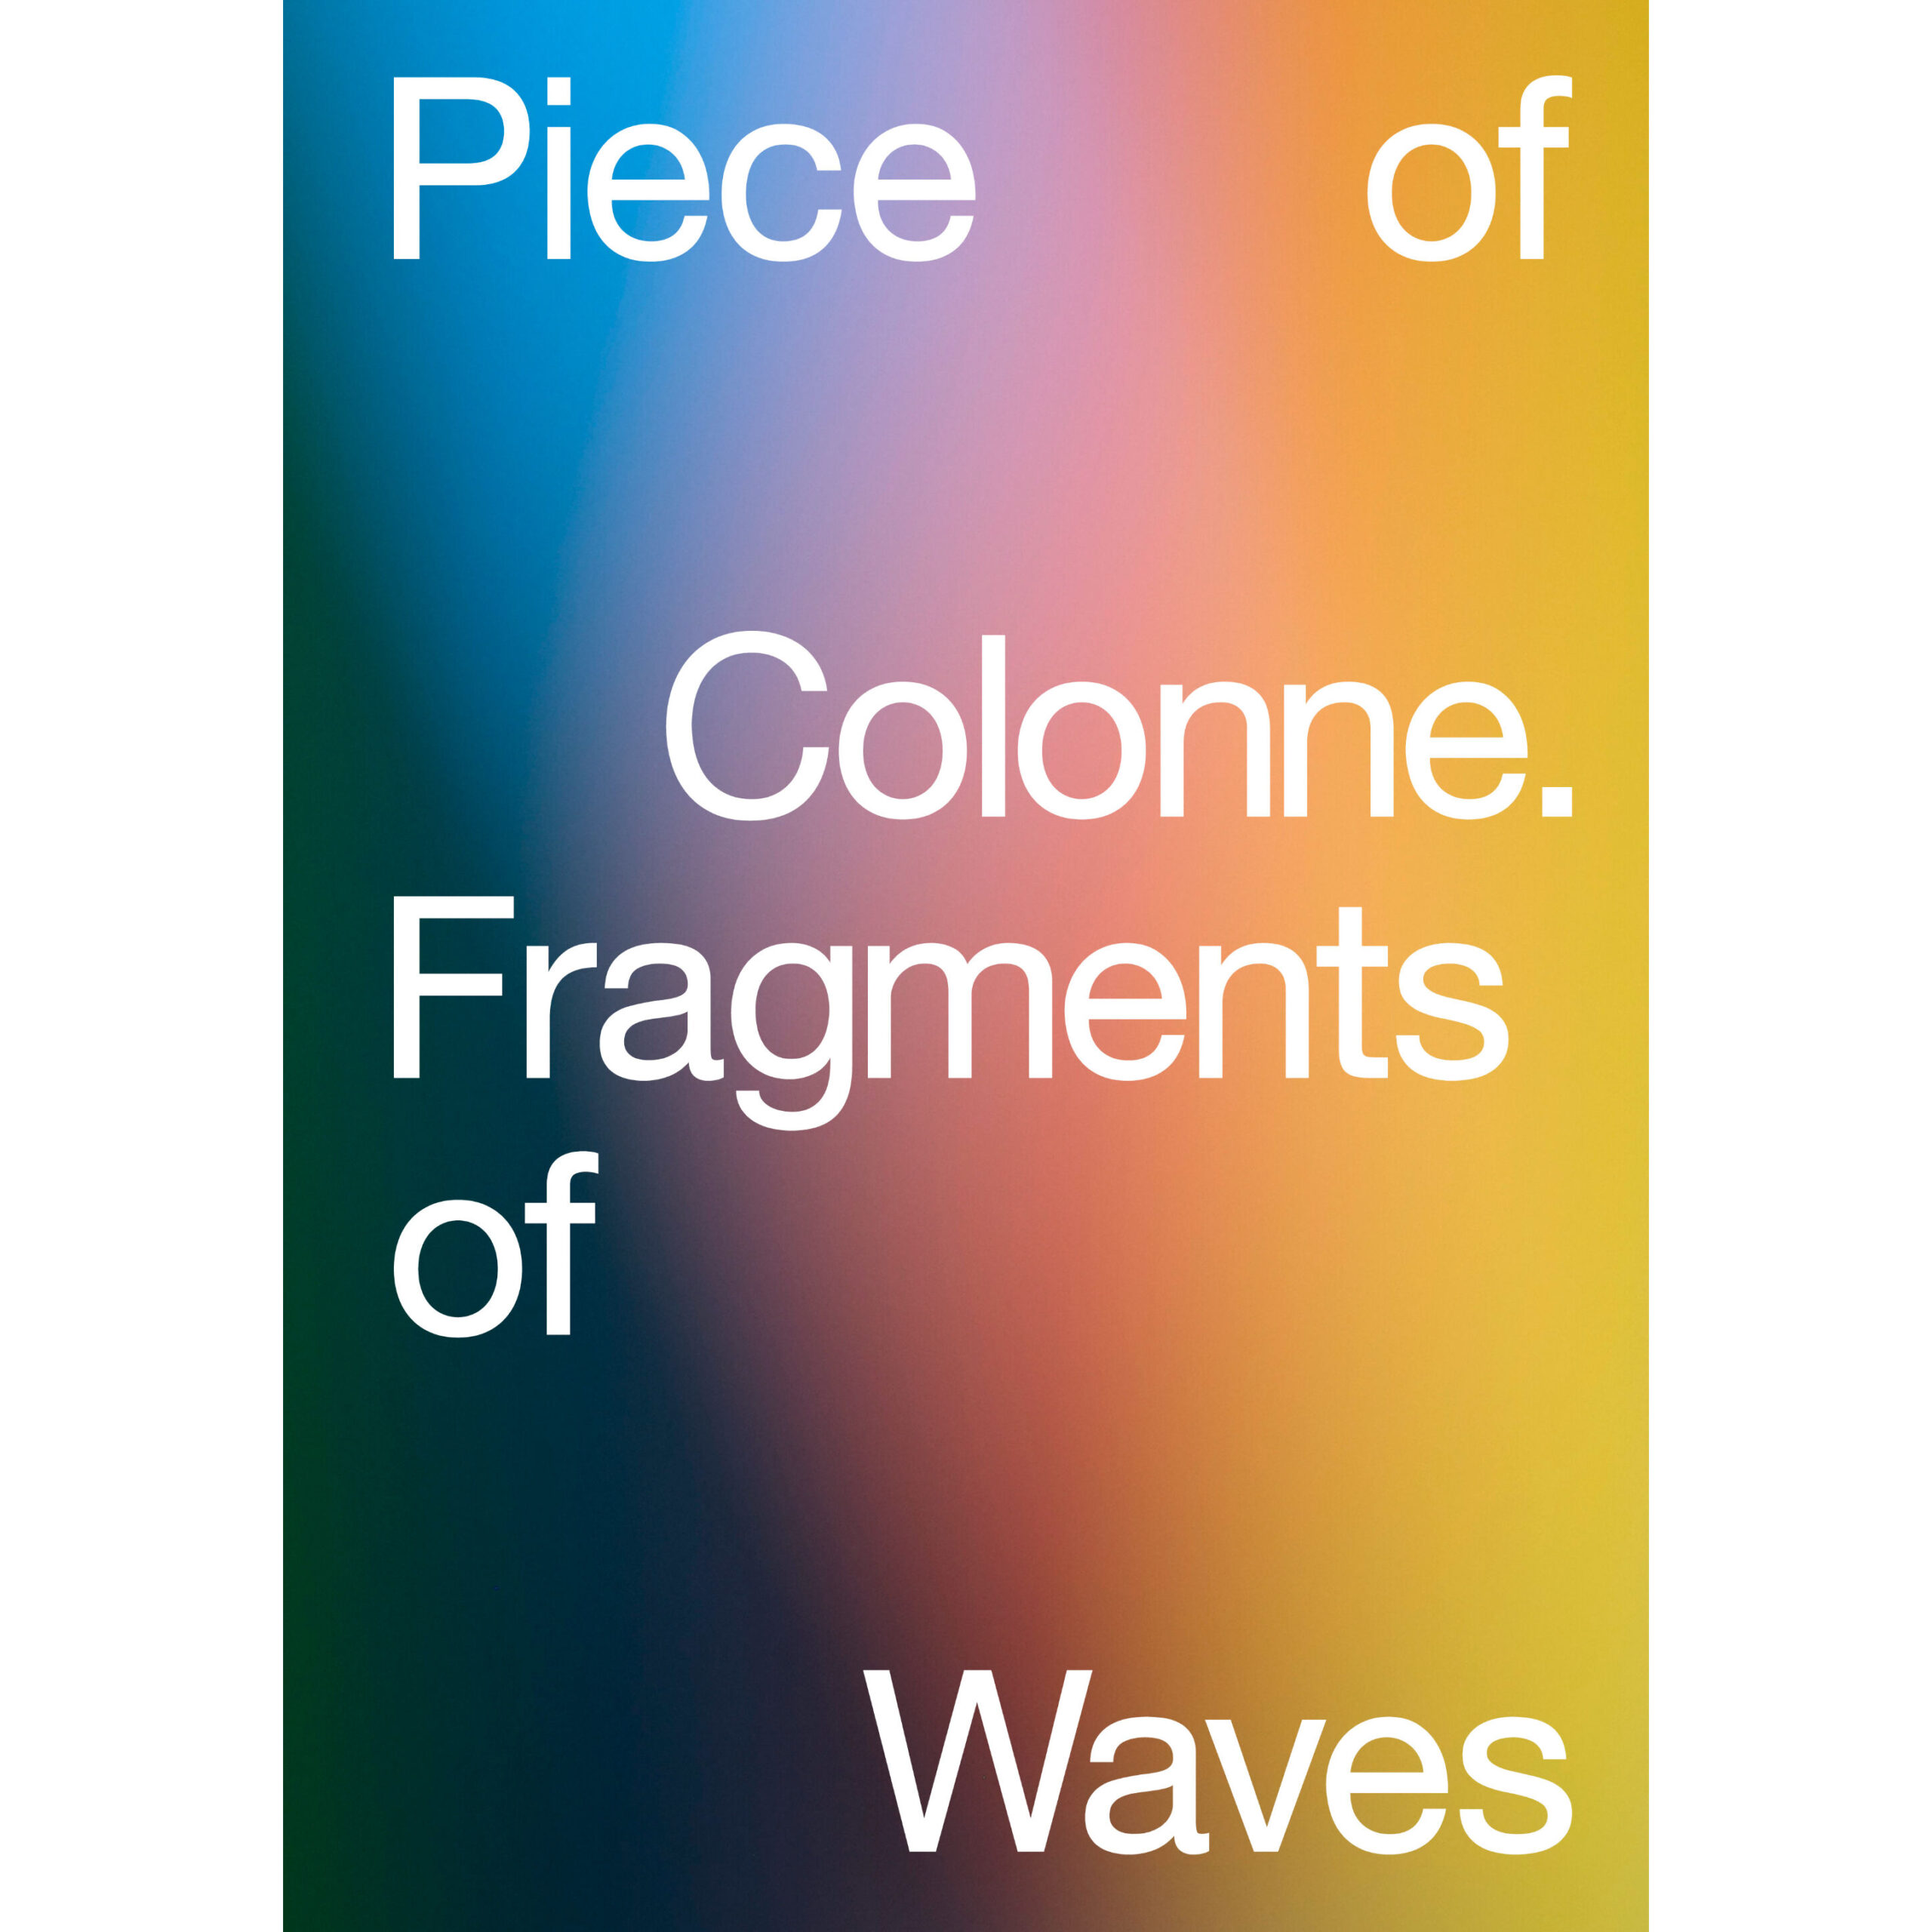 Piece of Colonne. Fragments of Waves